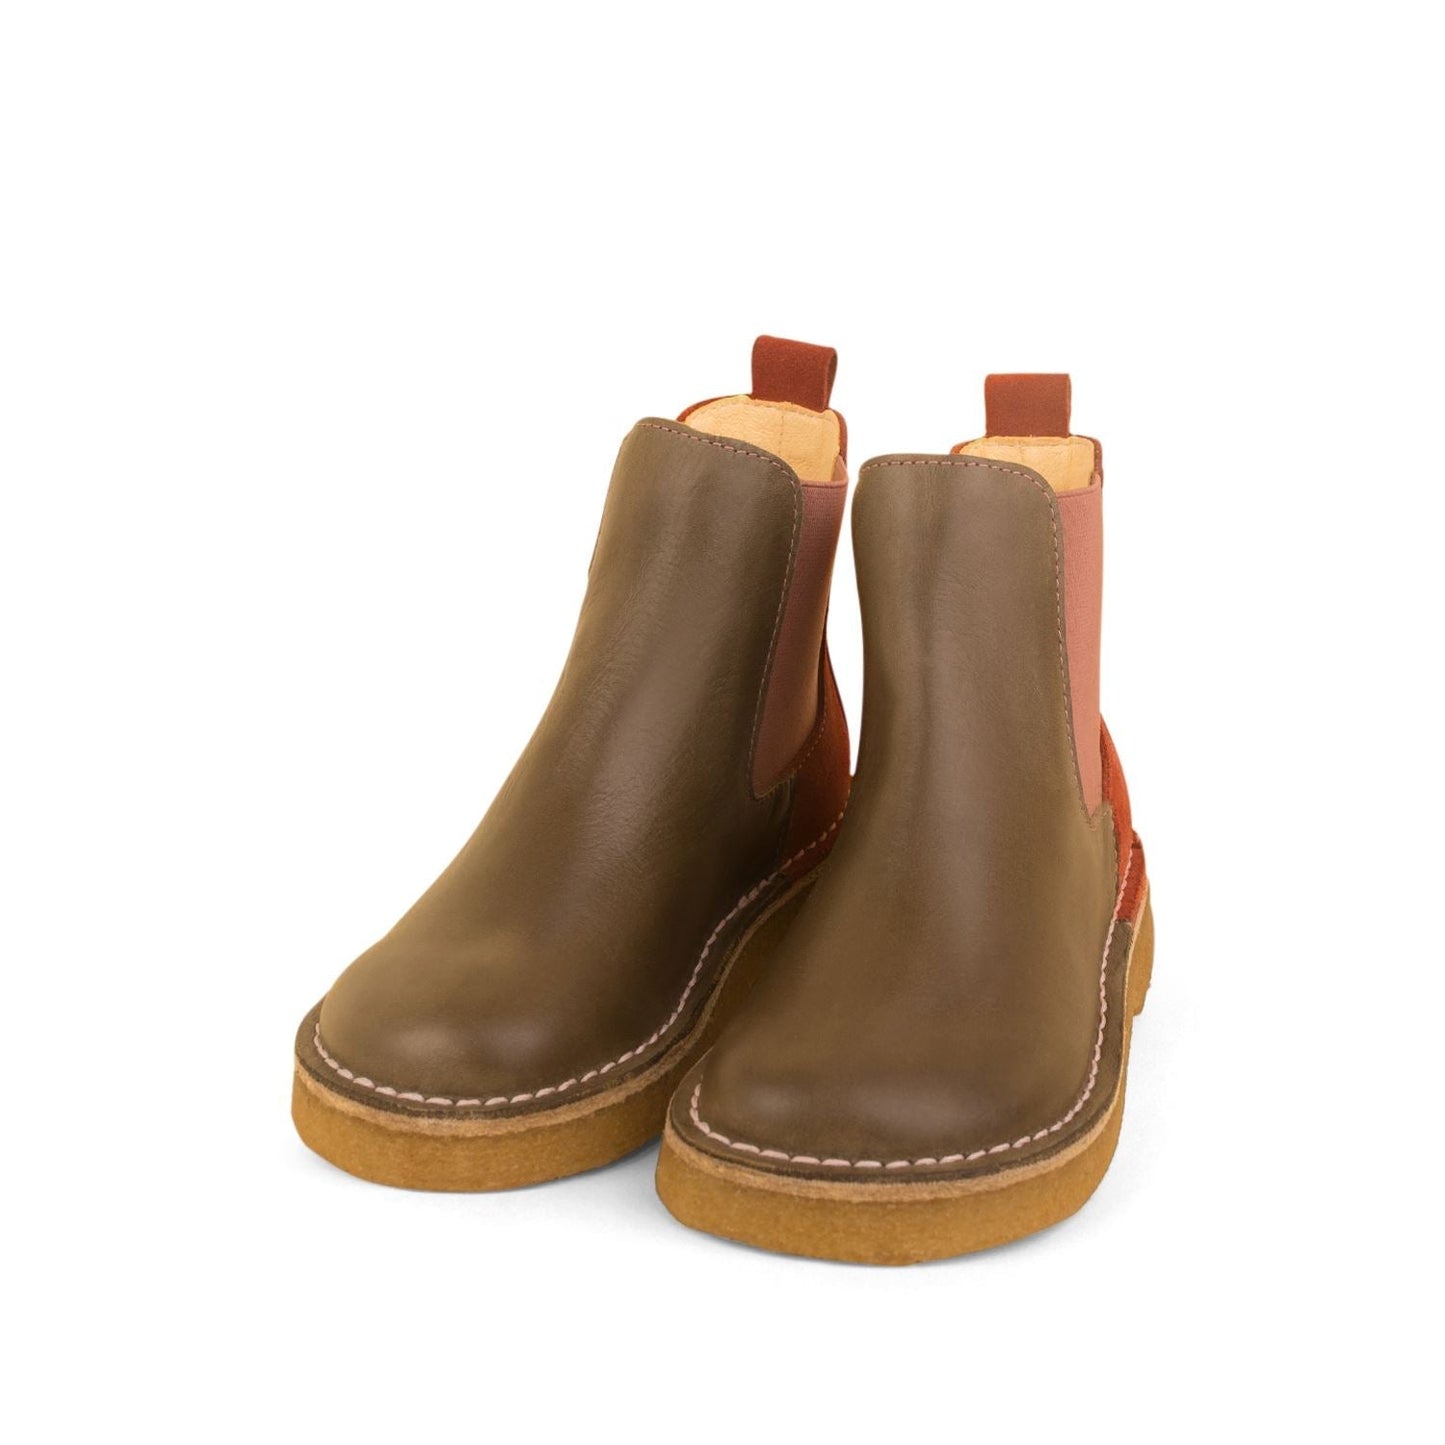 Olive Chelsea Boot Shoes Dulis Shoes 